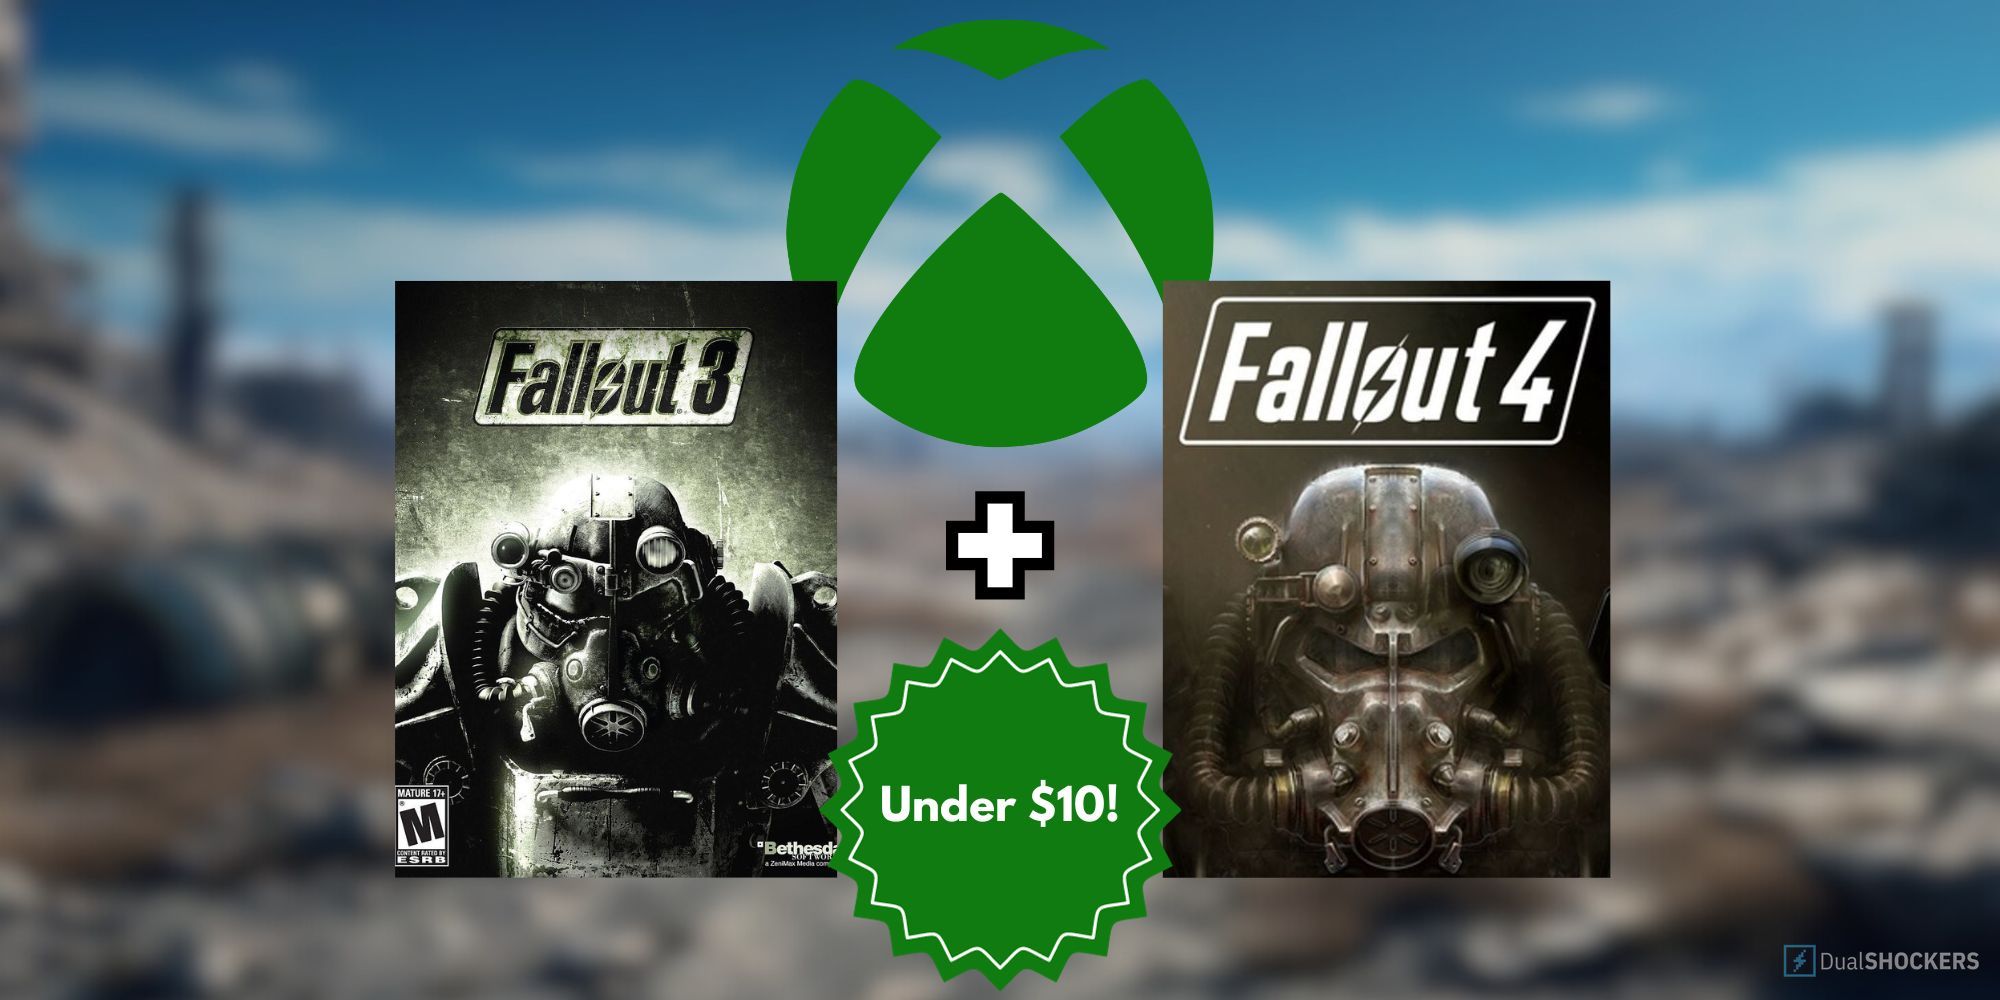 Pick Up Both Fallout 3 & Fallout 4 For Under $10 In Xbox Sale